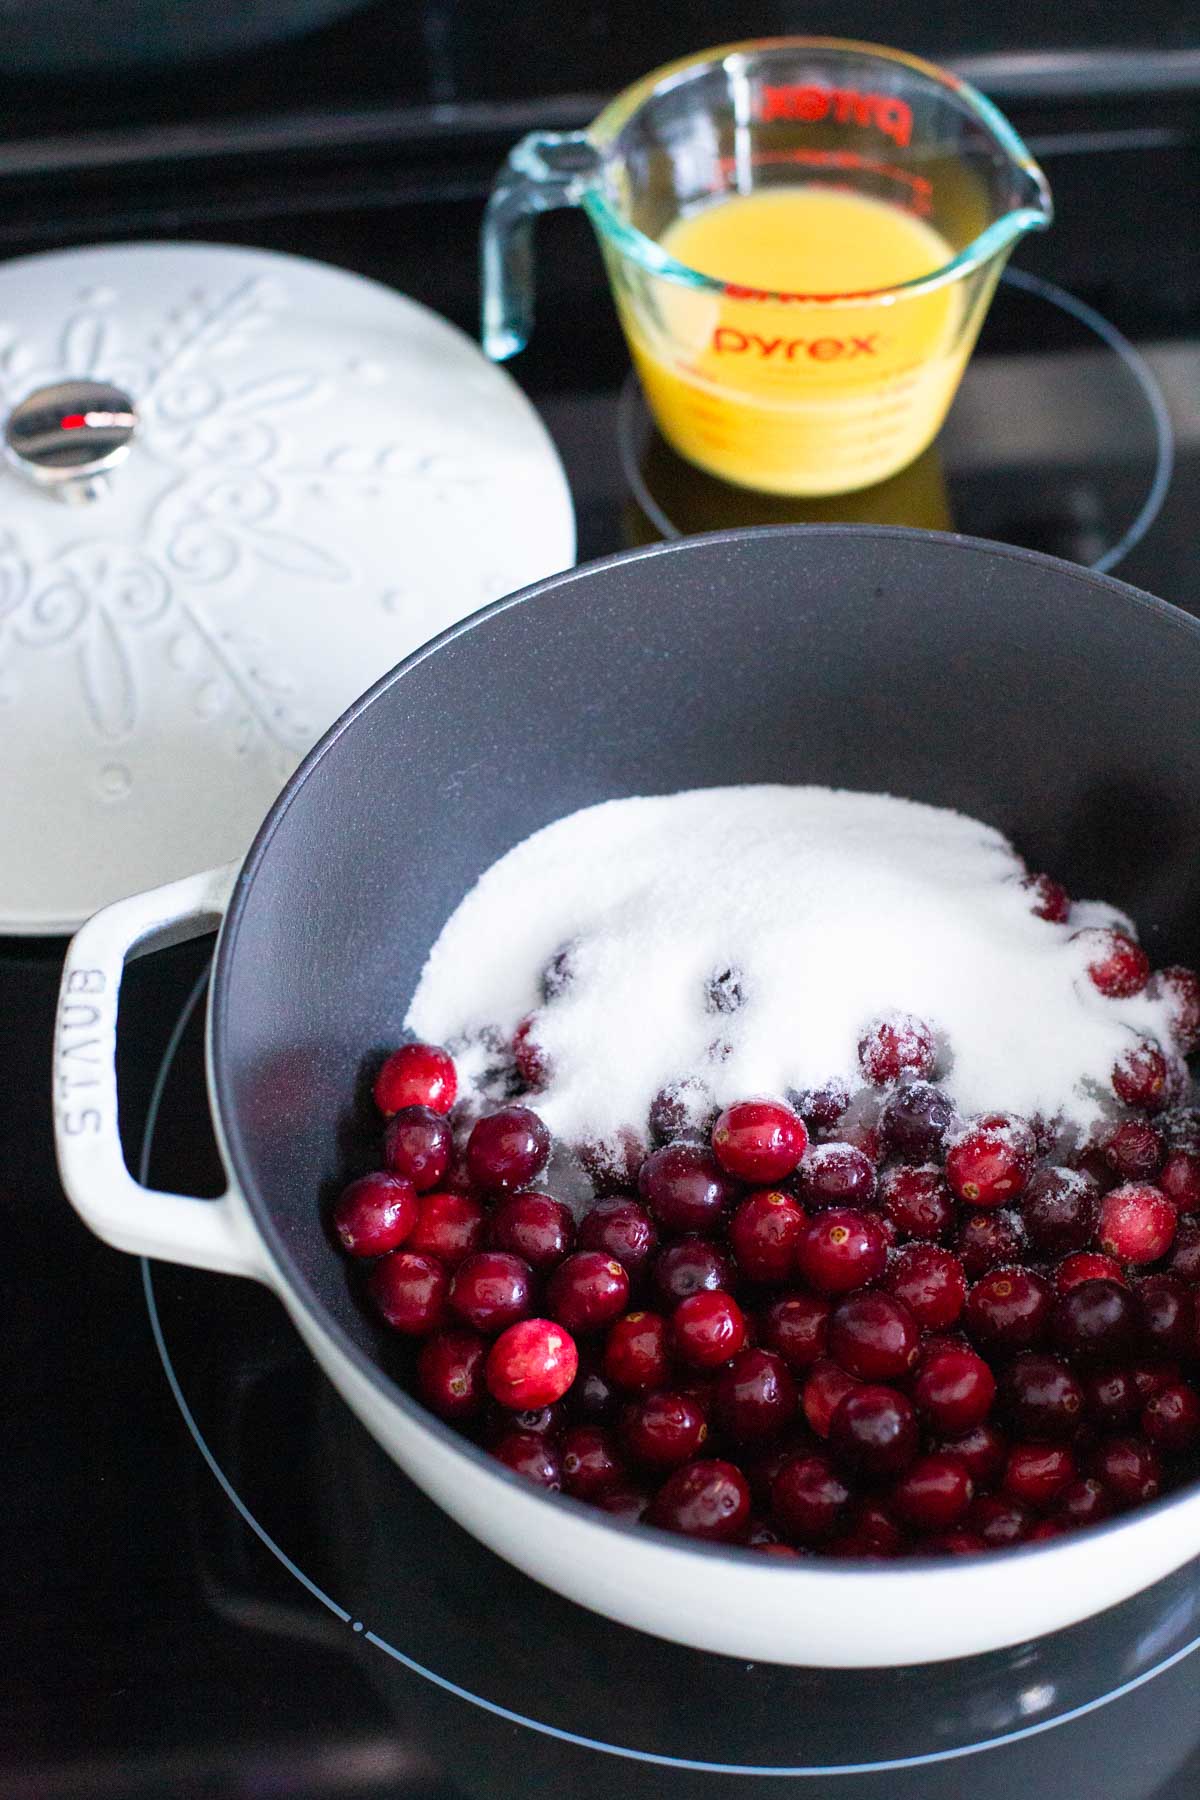 The ingredients for the homemade cranberry sauce are prepped and ready for cooking.